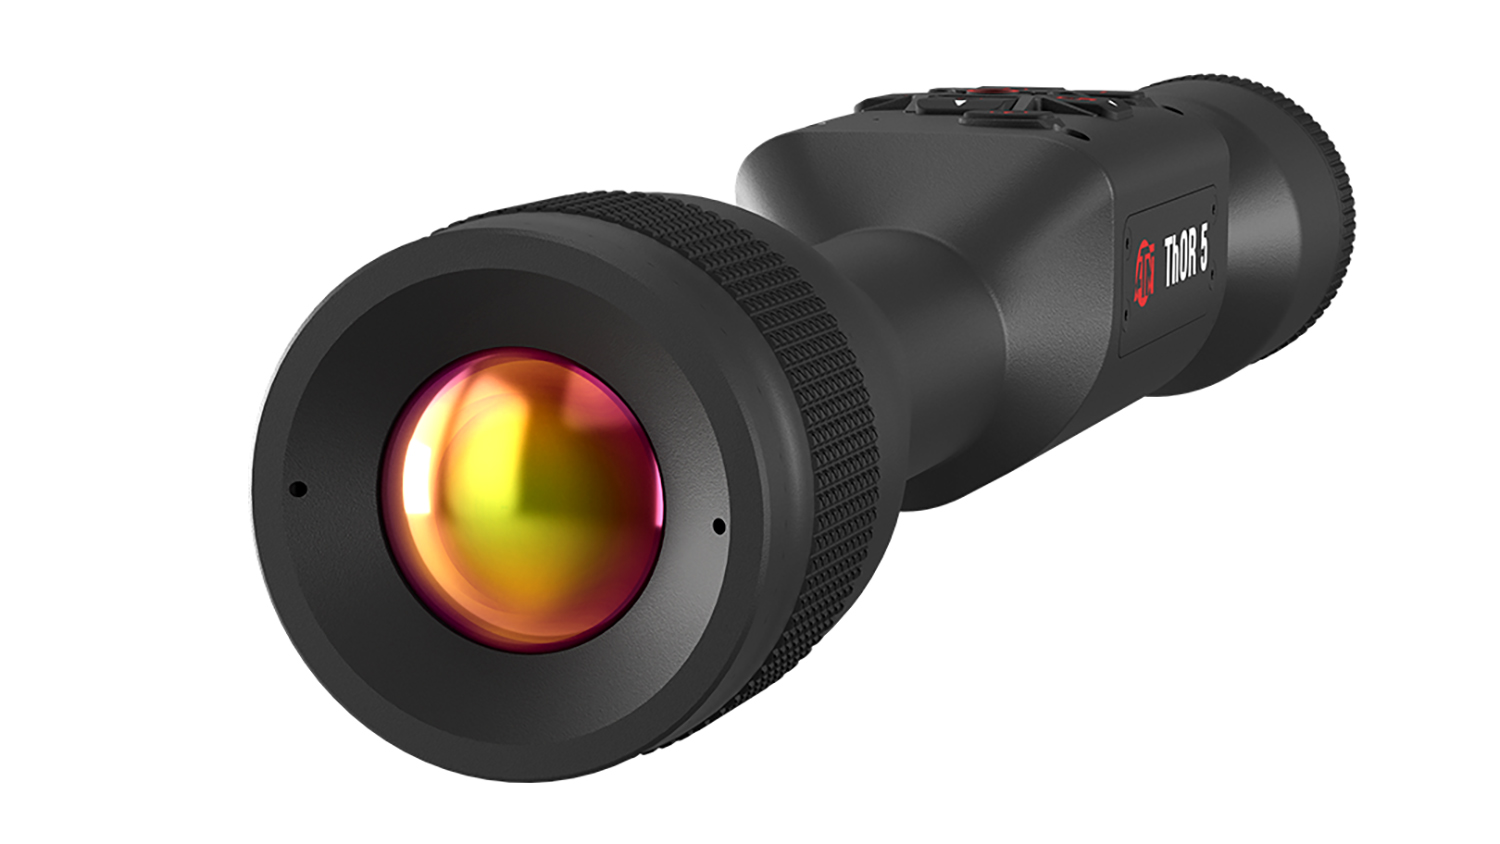 ATN TIWST5335A Thor 5 320 Thermal Rifle Scope, Black Anodized 5-20X, Illuminated Multi Reticle, Zoom 320X240, 12 Microns